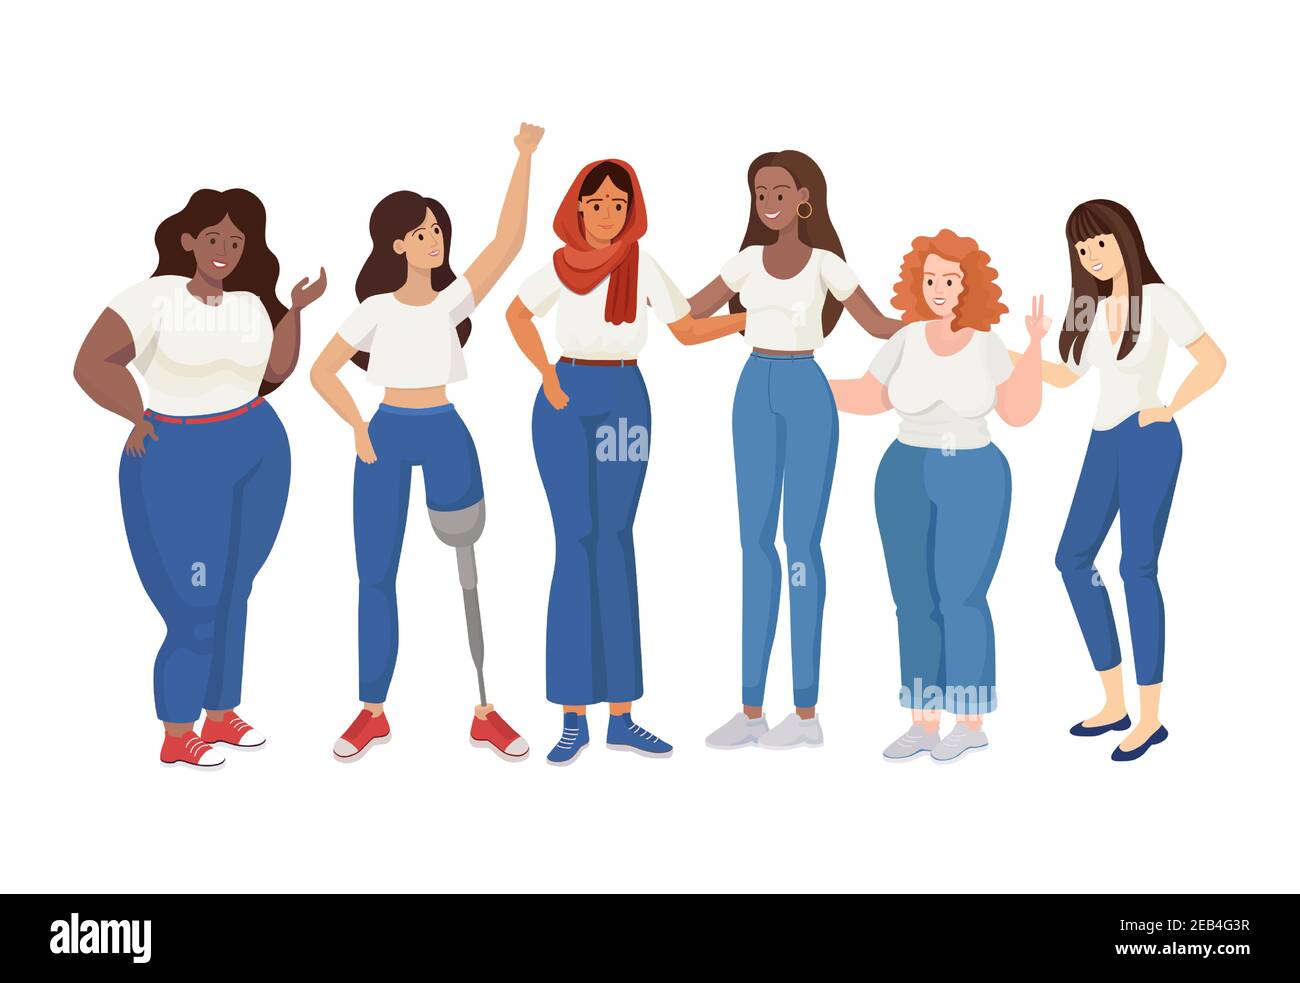 Group of standing women of different sizes and races vector flat illustration. Skinny and curvy women, woman with prosthesis. Girl power, International Woman Day, Feminism, body positive concept. Stock Vector